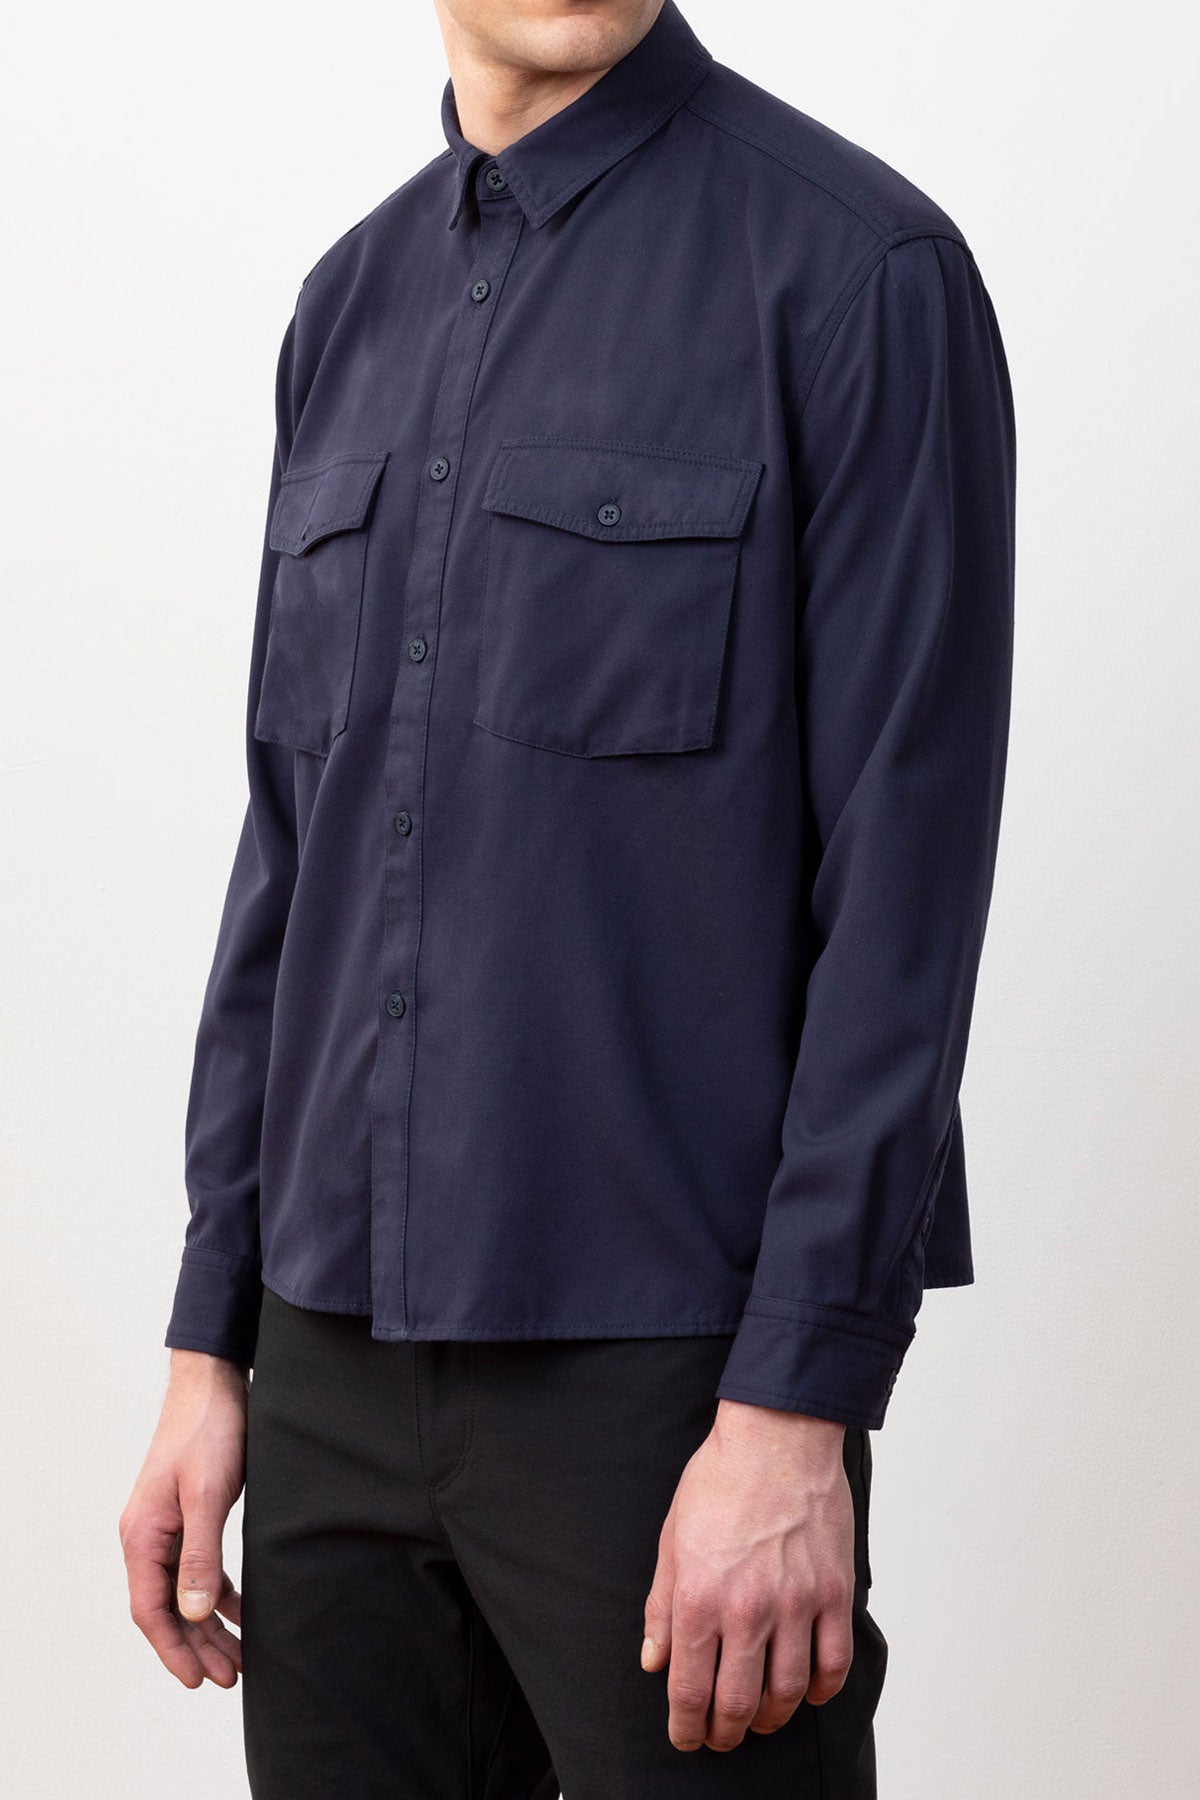 Experiment 262 - Allwool Two Pocket